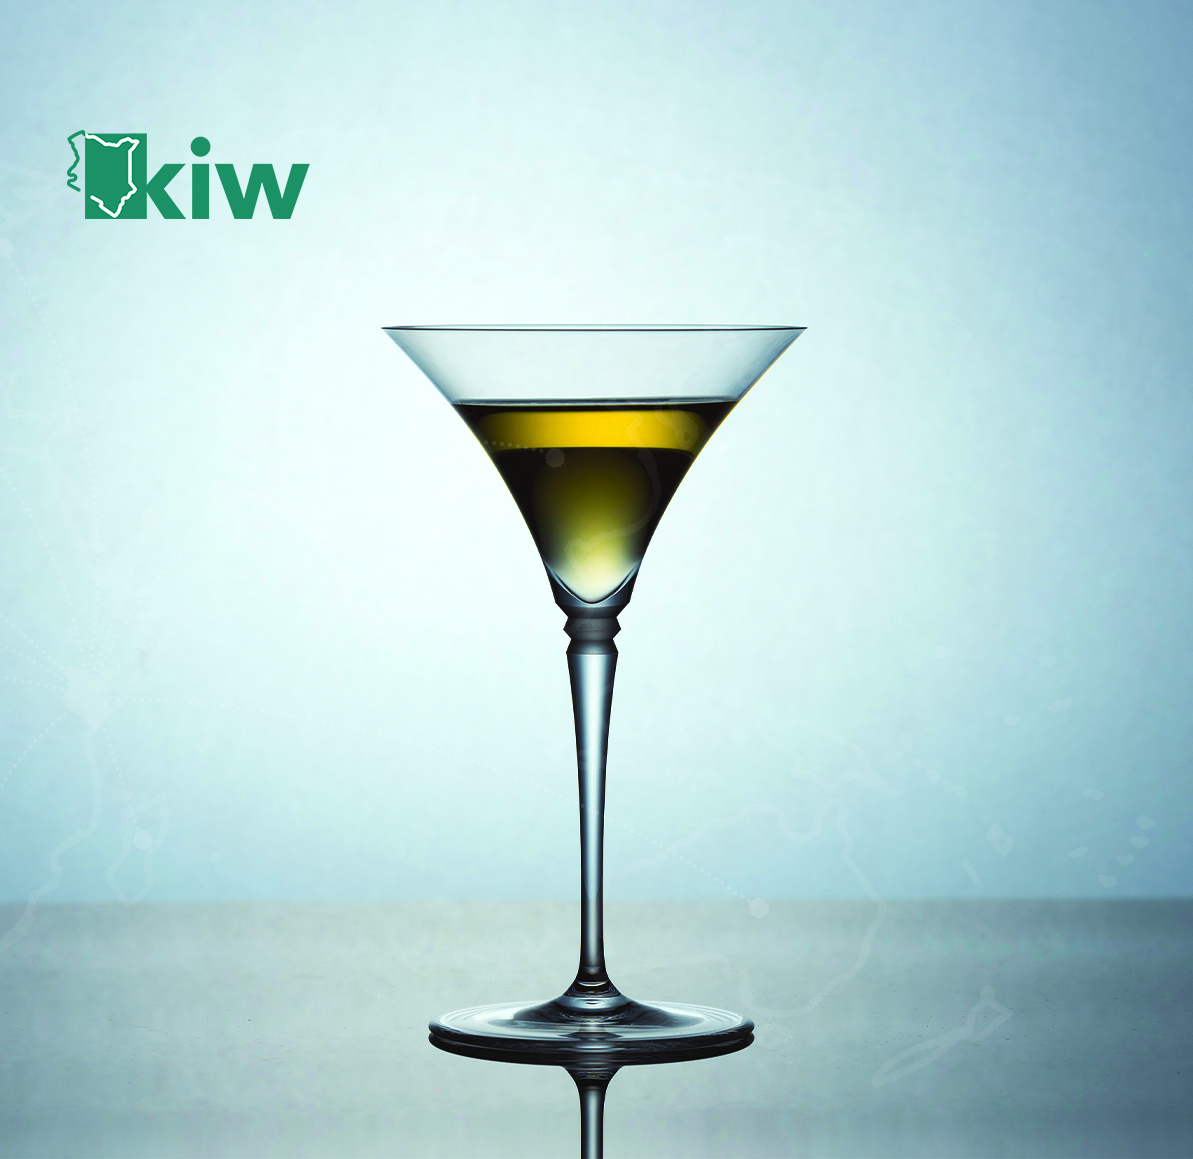 Cocktail Image